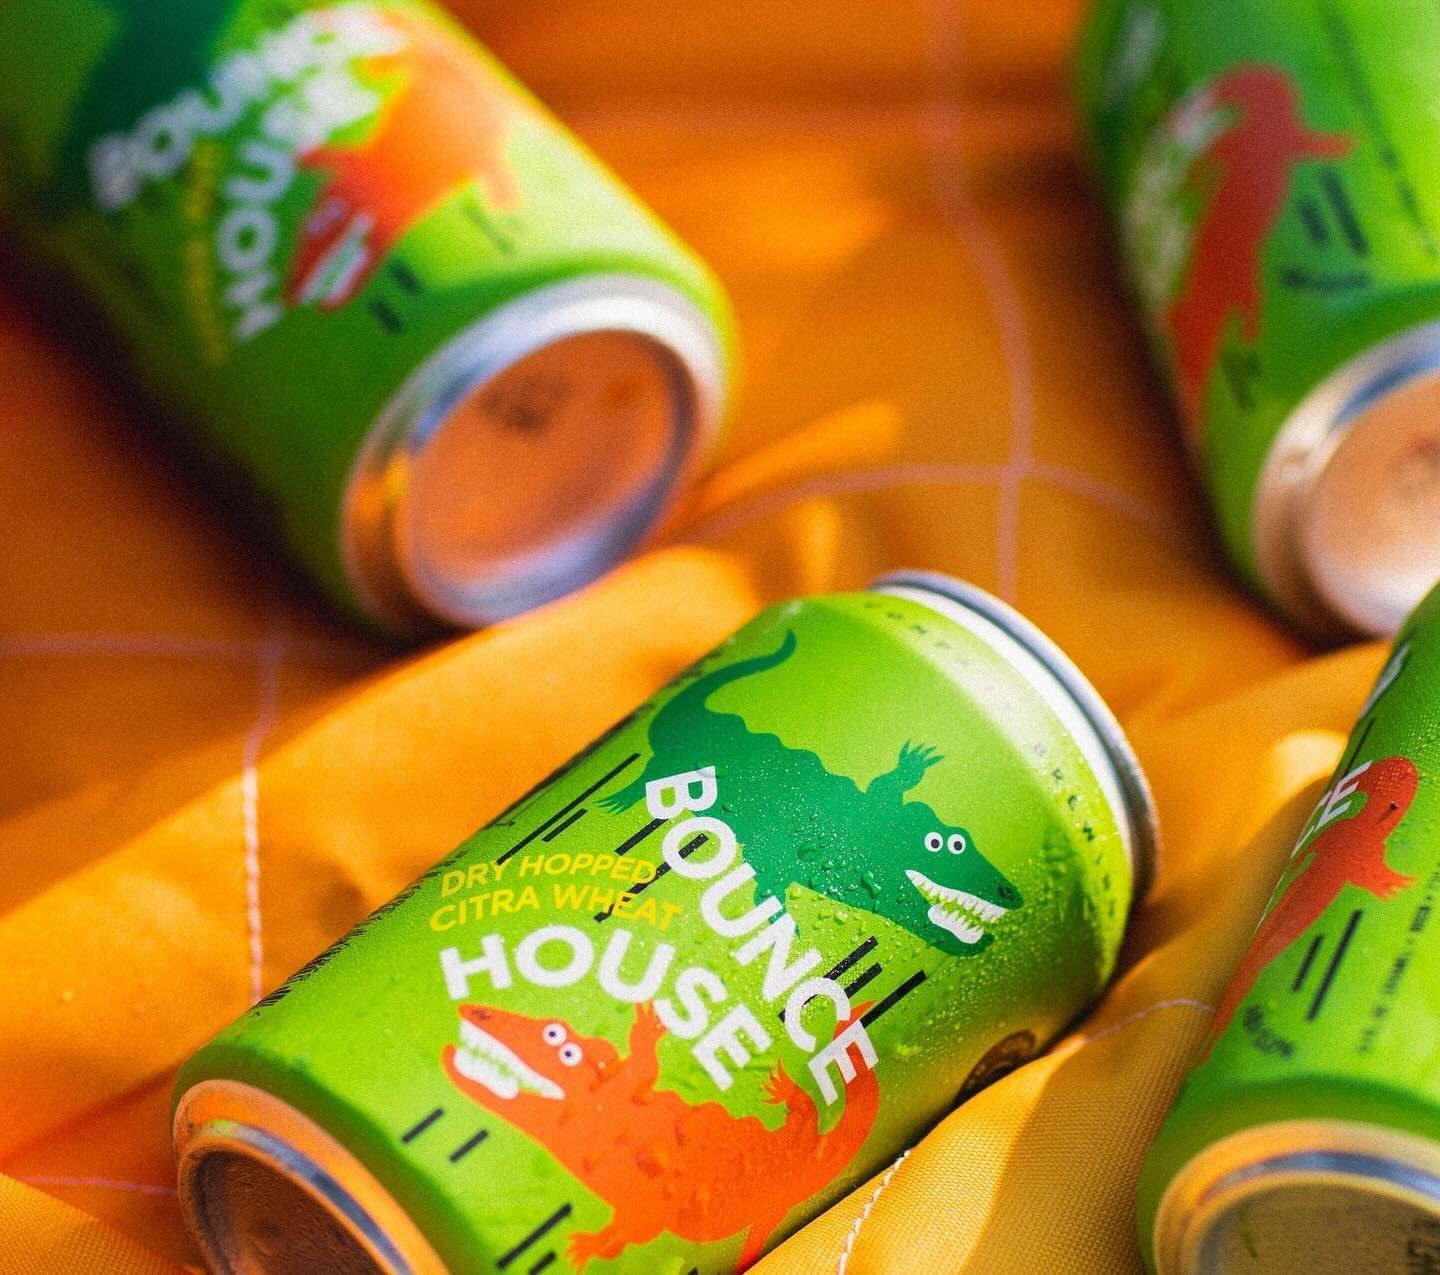 Bounce House is back THIS WEEKEND!⁠
⁠
Bright and easy drinking, delivering big citrus flavors up front, and subtle aromas of pink grapefruit, citrus rinds, dried roses, pine resin, and tropical fruits throughout. Bounce House is a hoppy, session whea